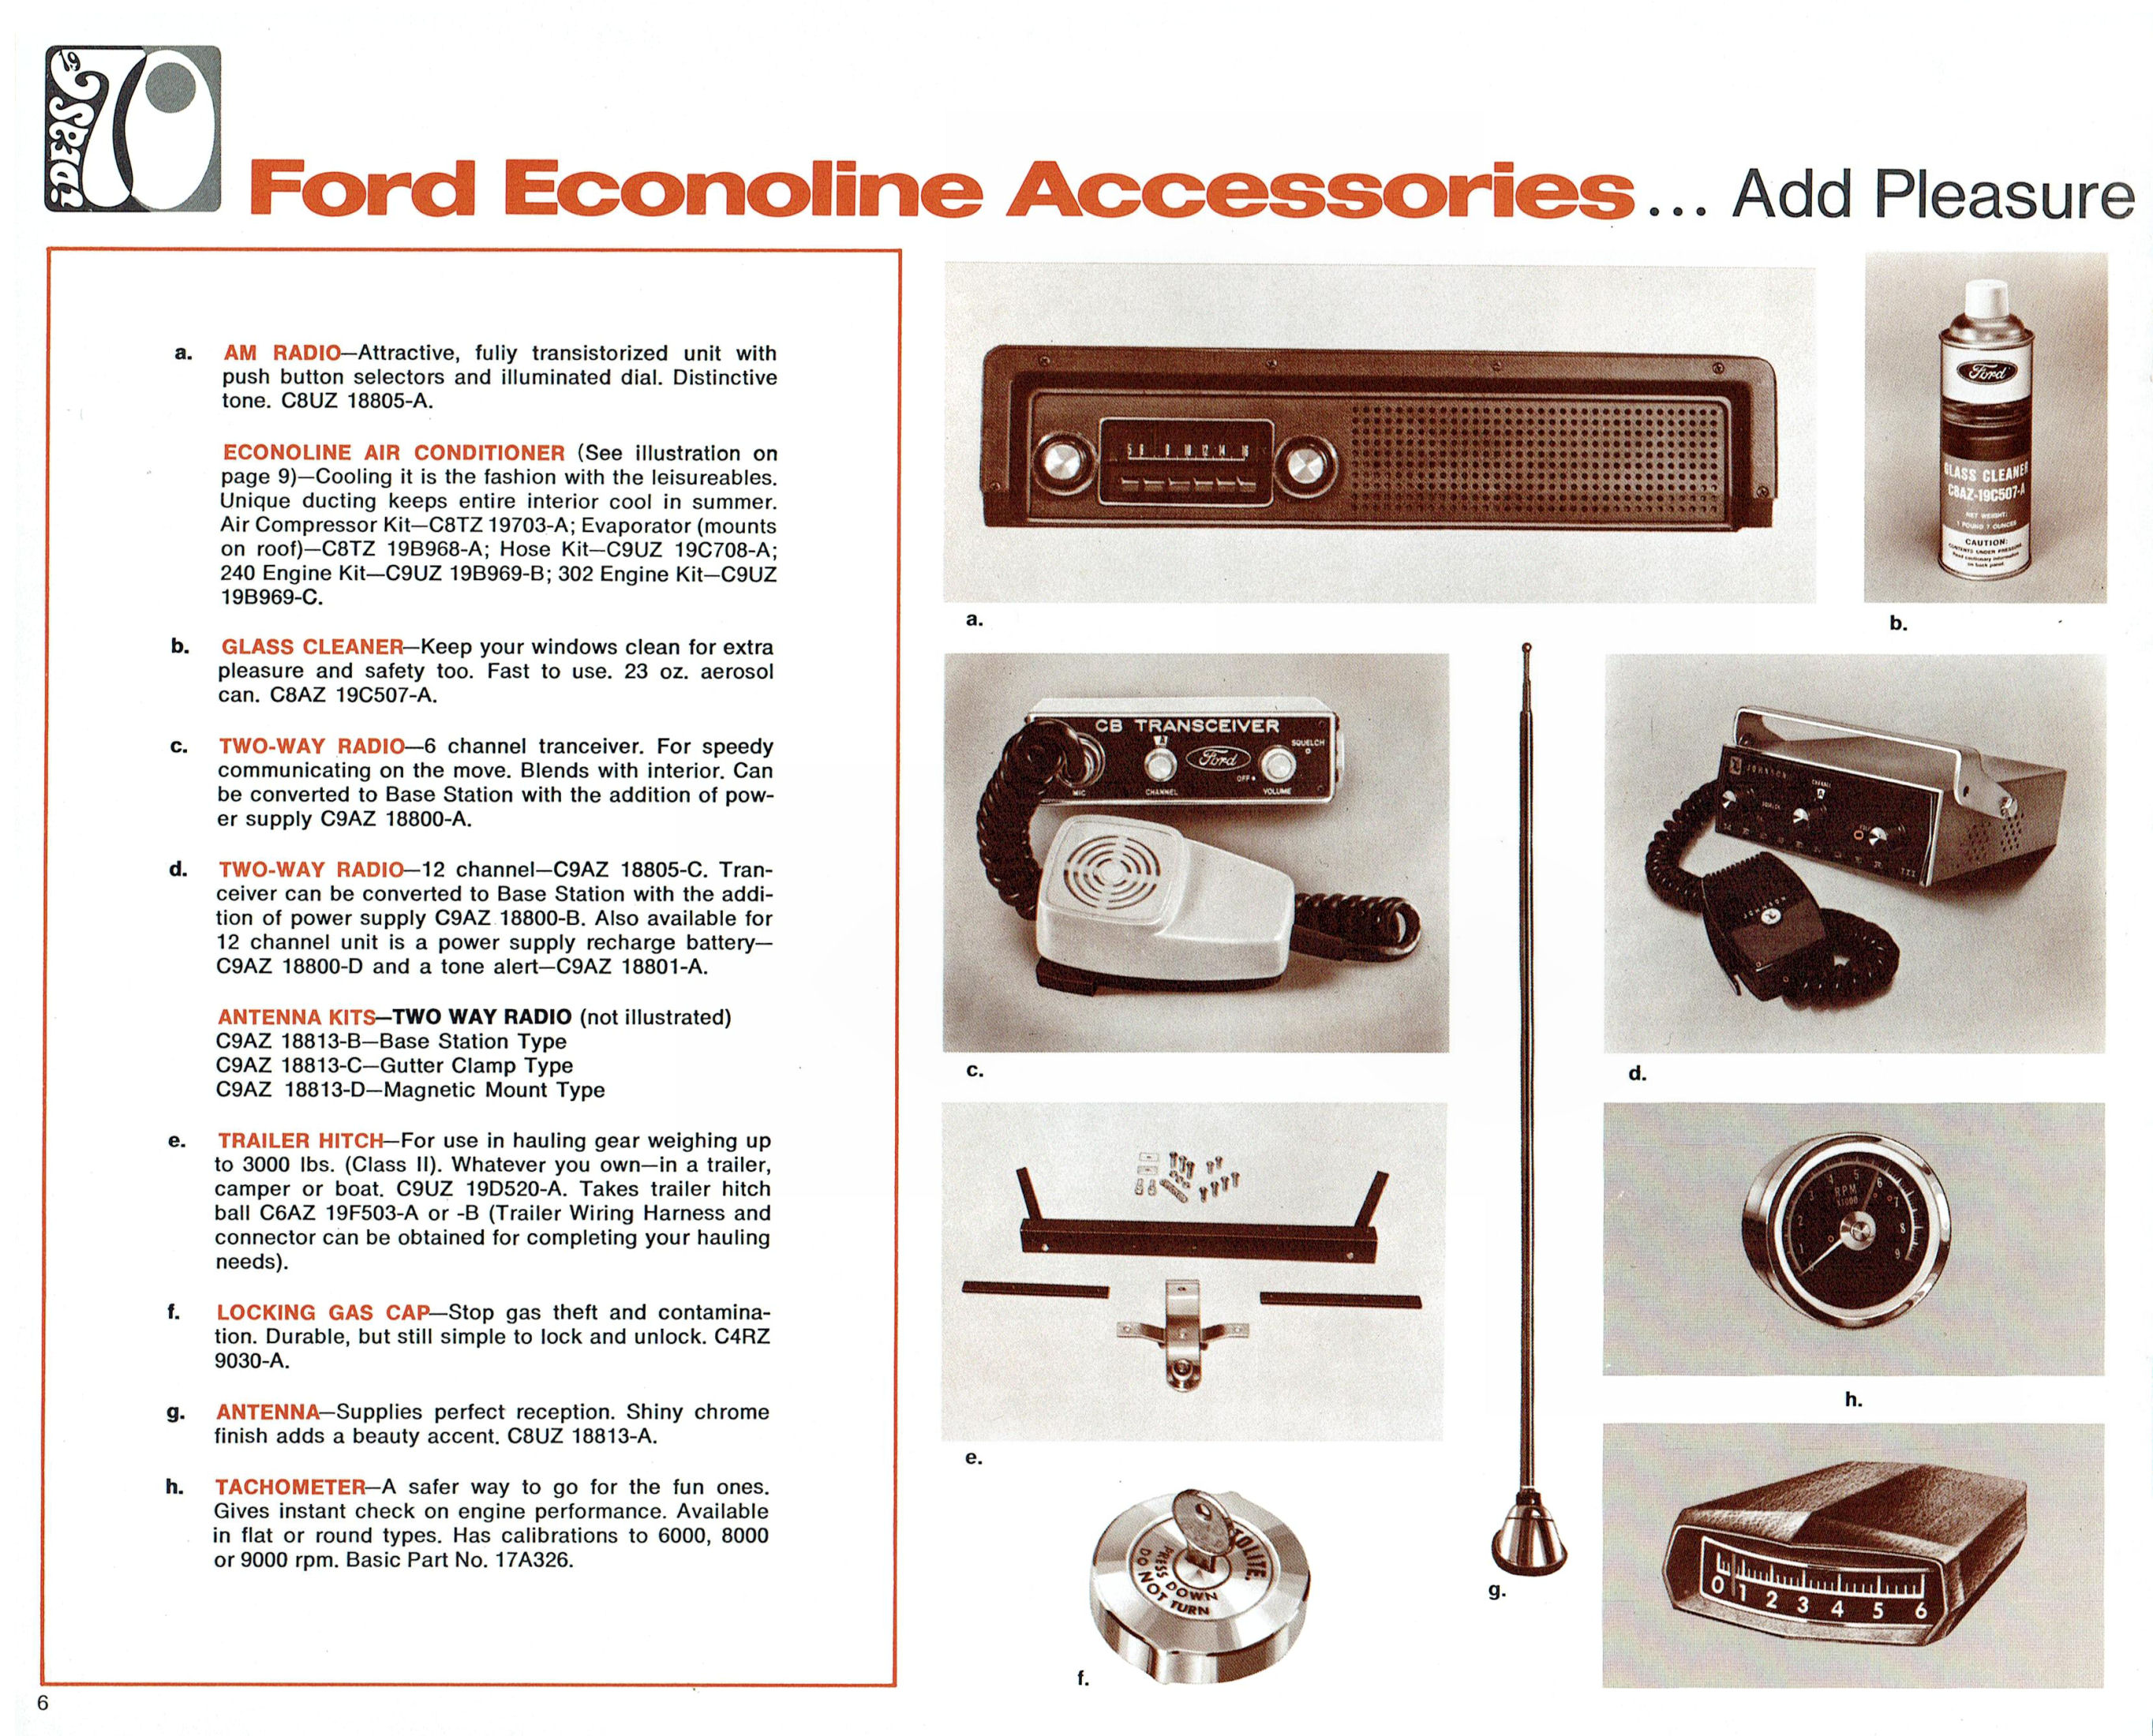 1970 Ford Truck Accessories-06